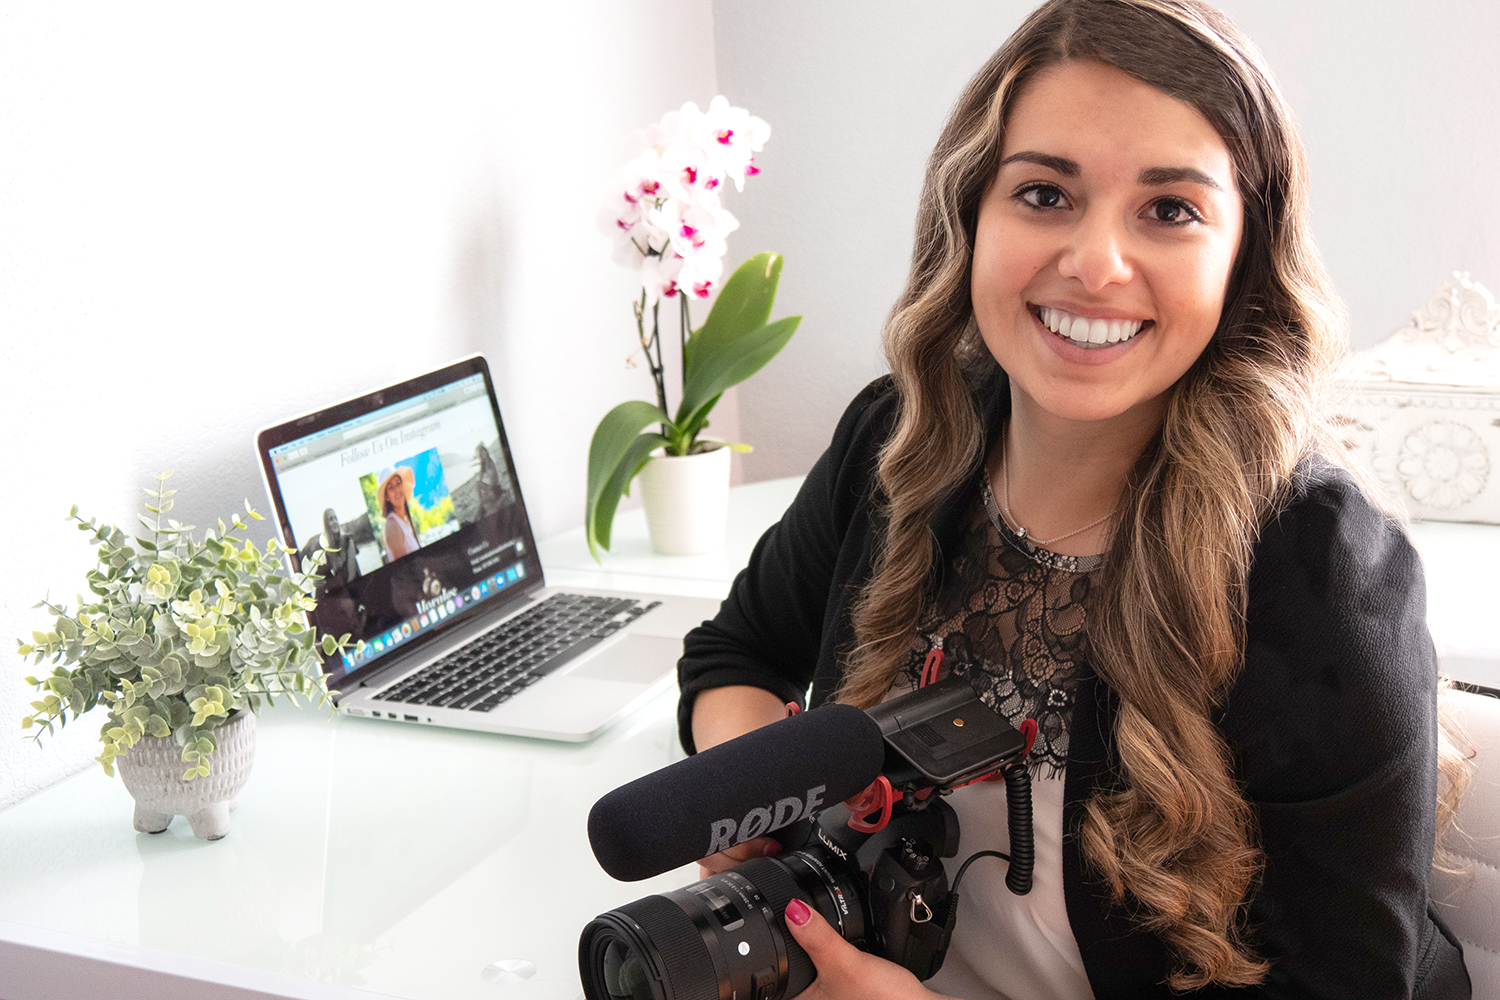 CWC alumna Abbey Morales sits at a white desk with her DSLR camera